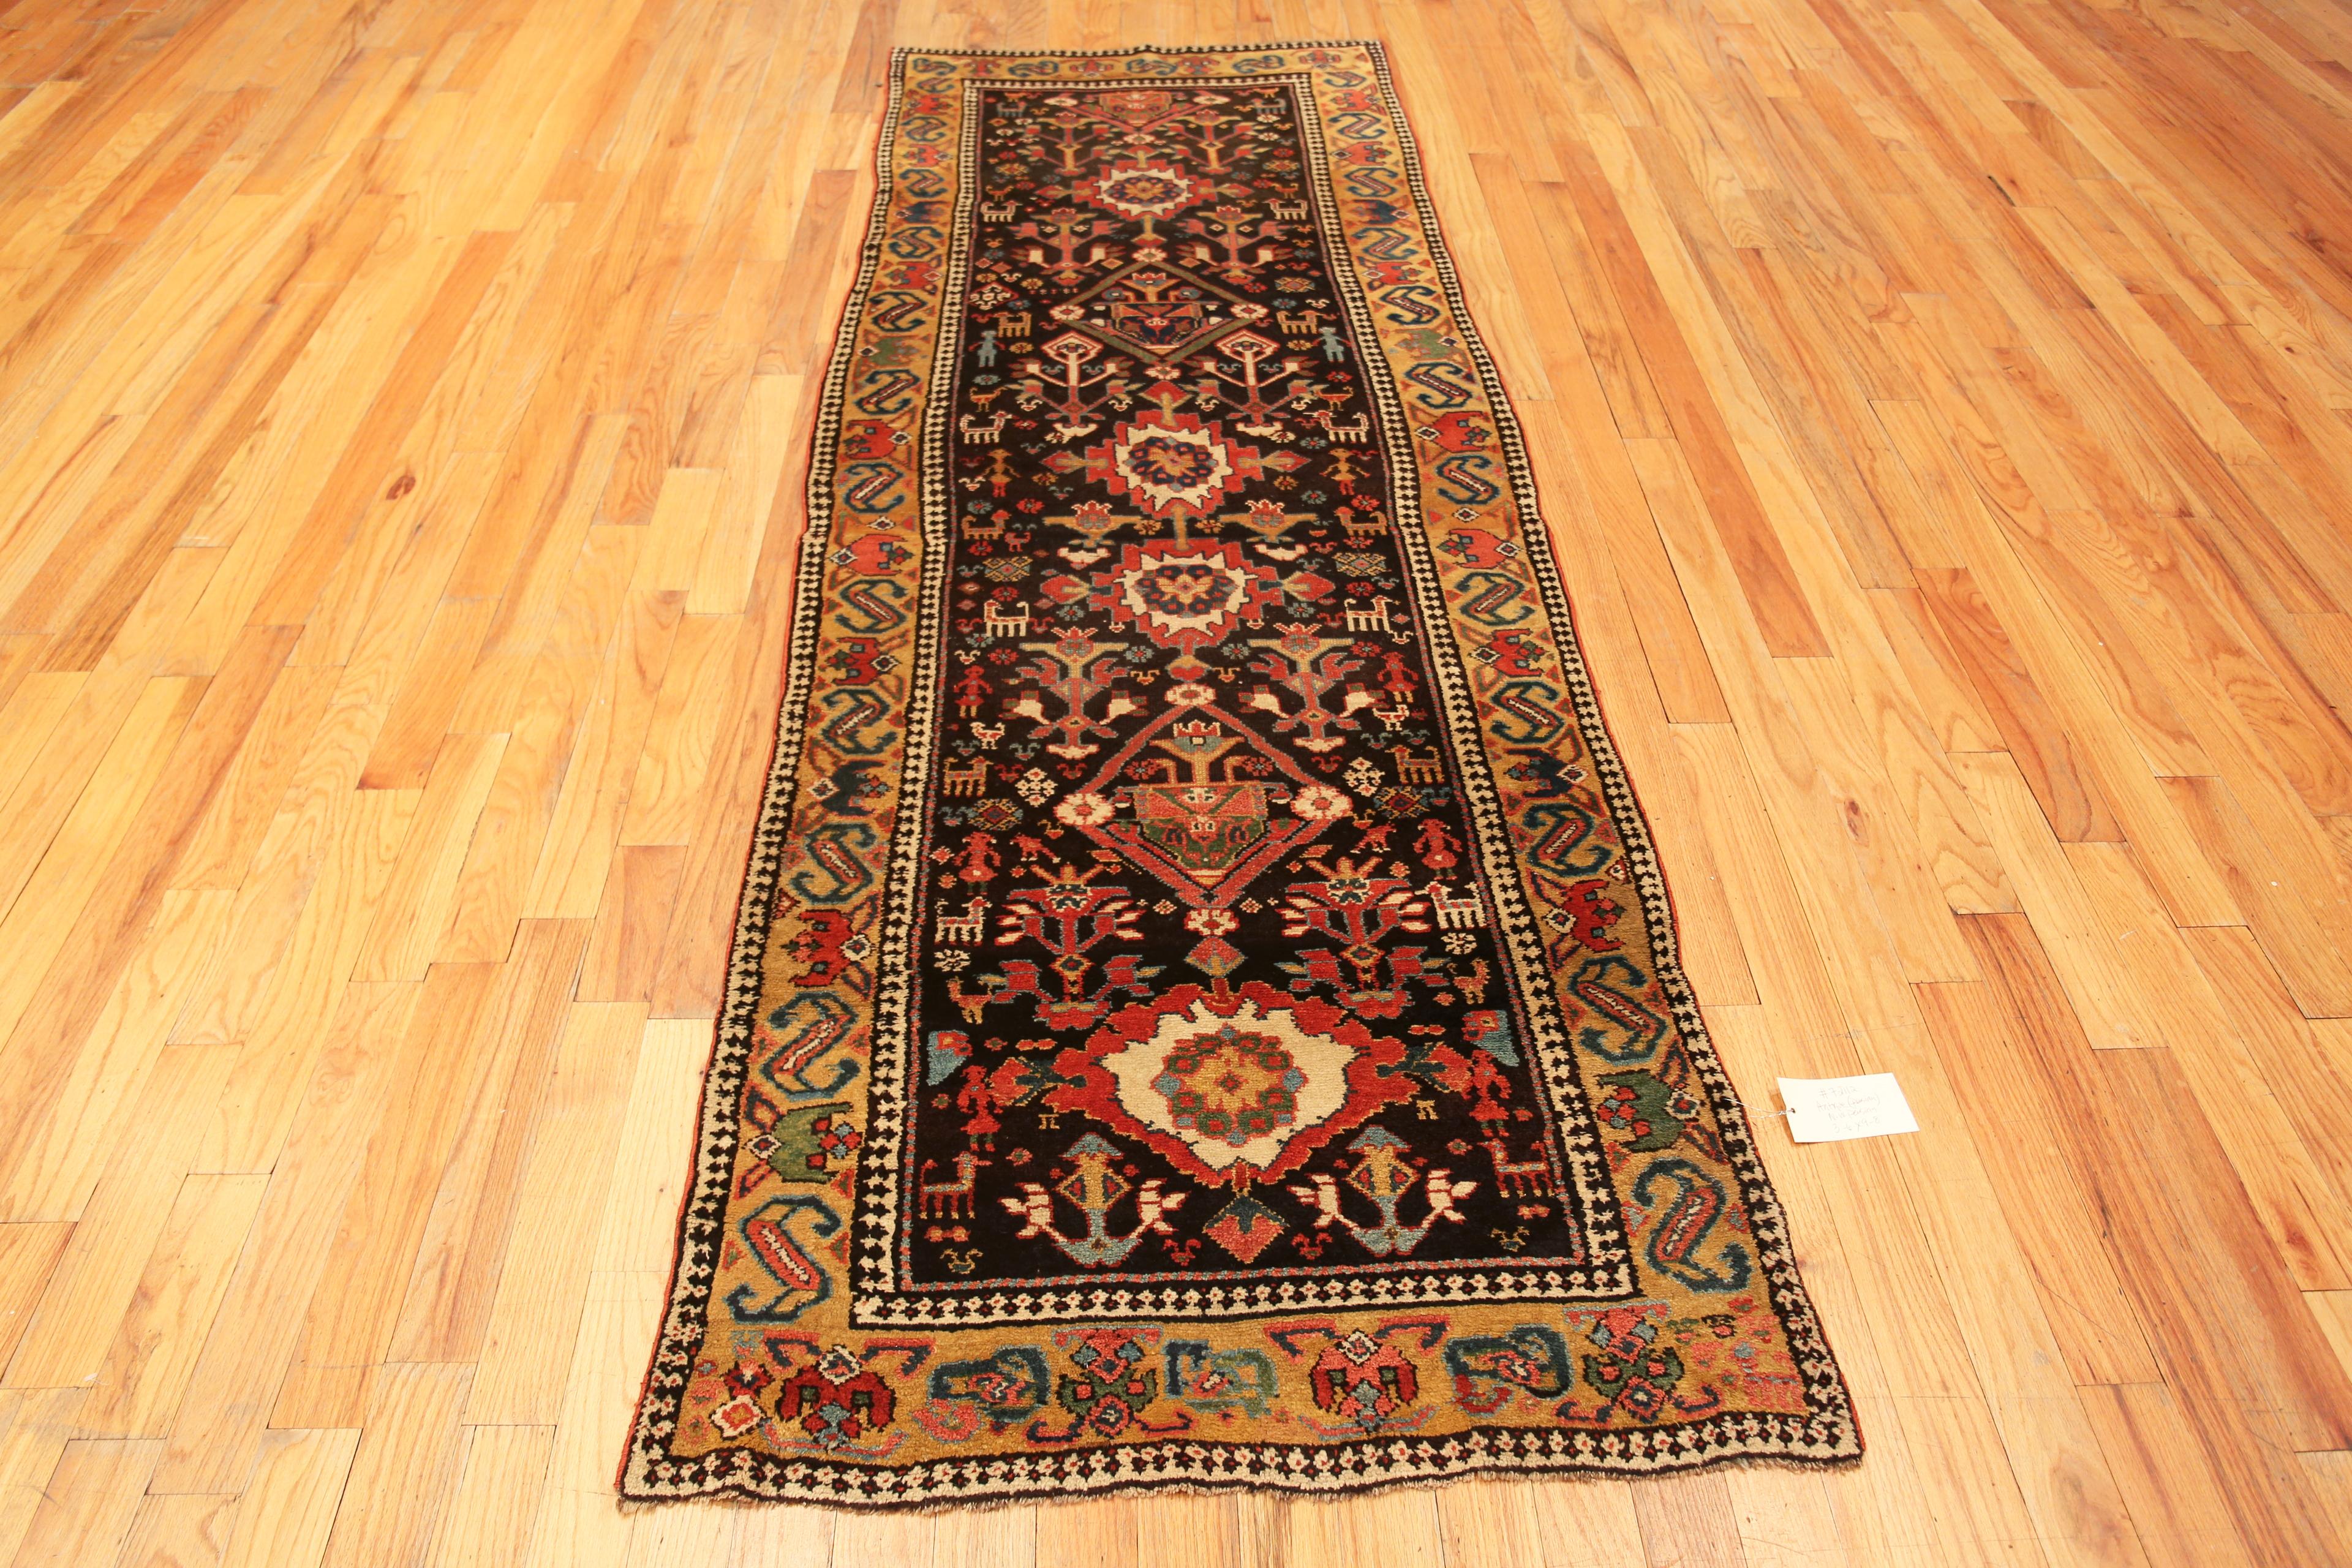 Tribal Antique North West Persian Jewel Tone Hallway Runner Allover Rug, Country of Origin: Persia, Circa date: 1900. Size: 3 ft 6 in x 9 ft 8 in (1.07 m x 2.95 m)